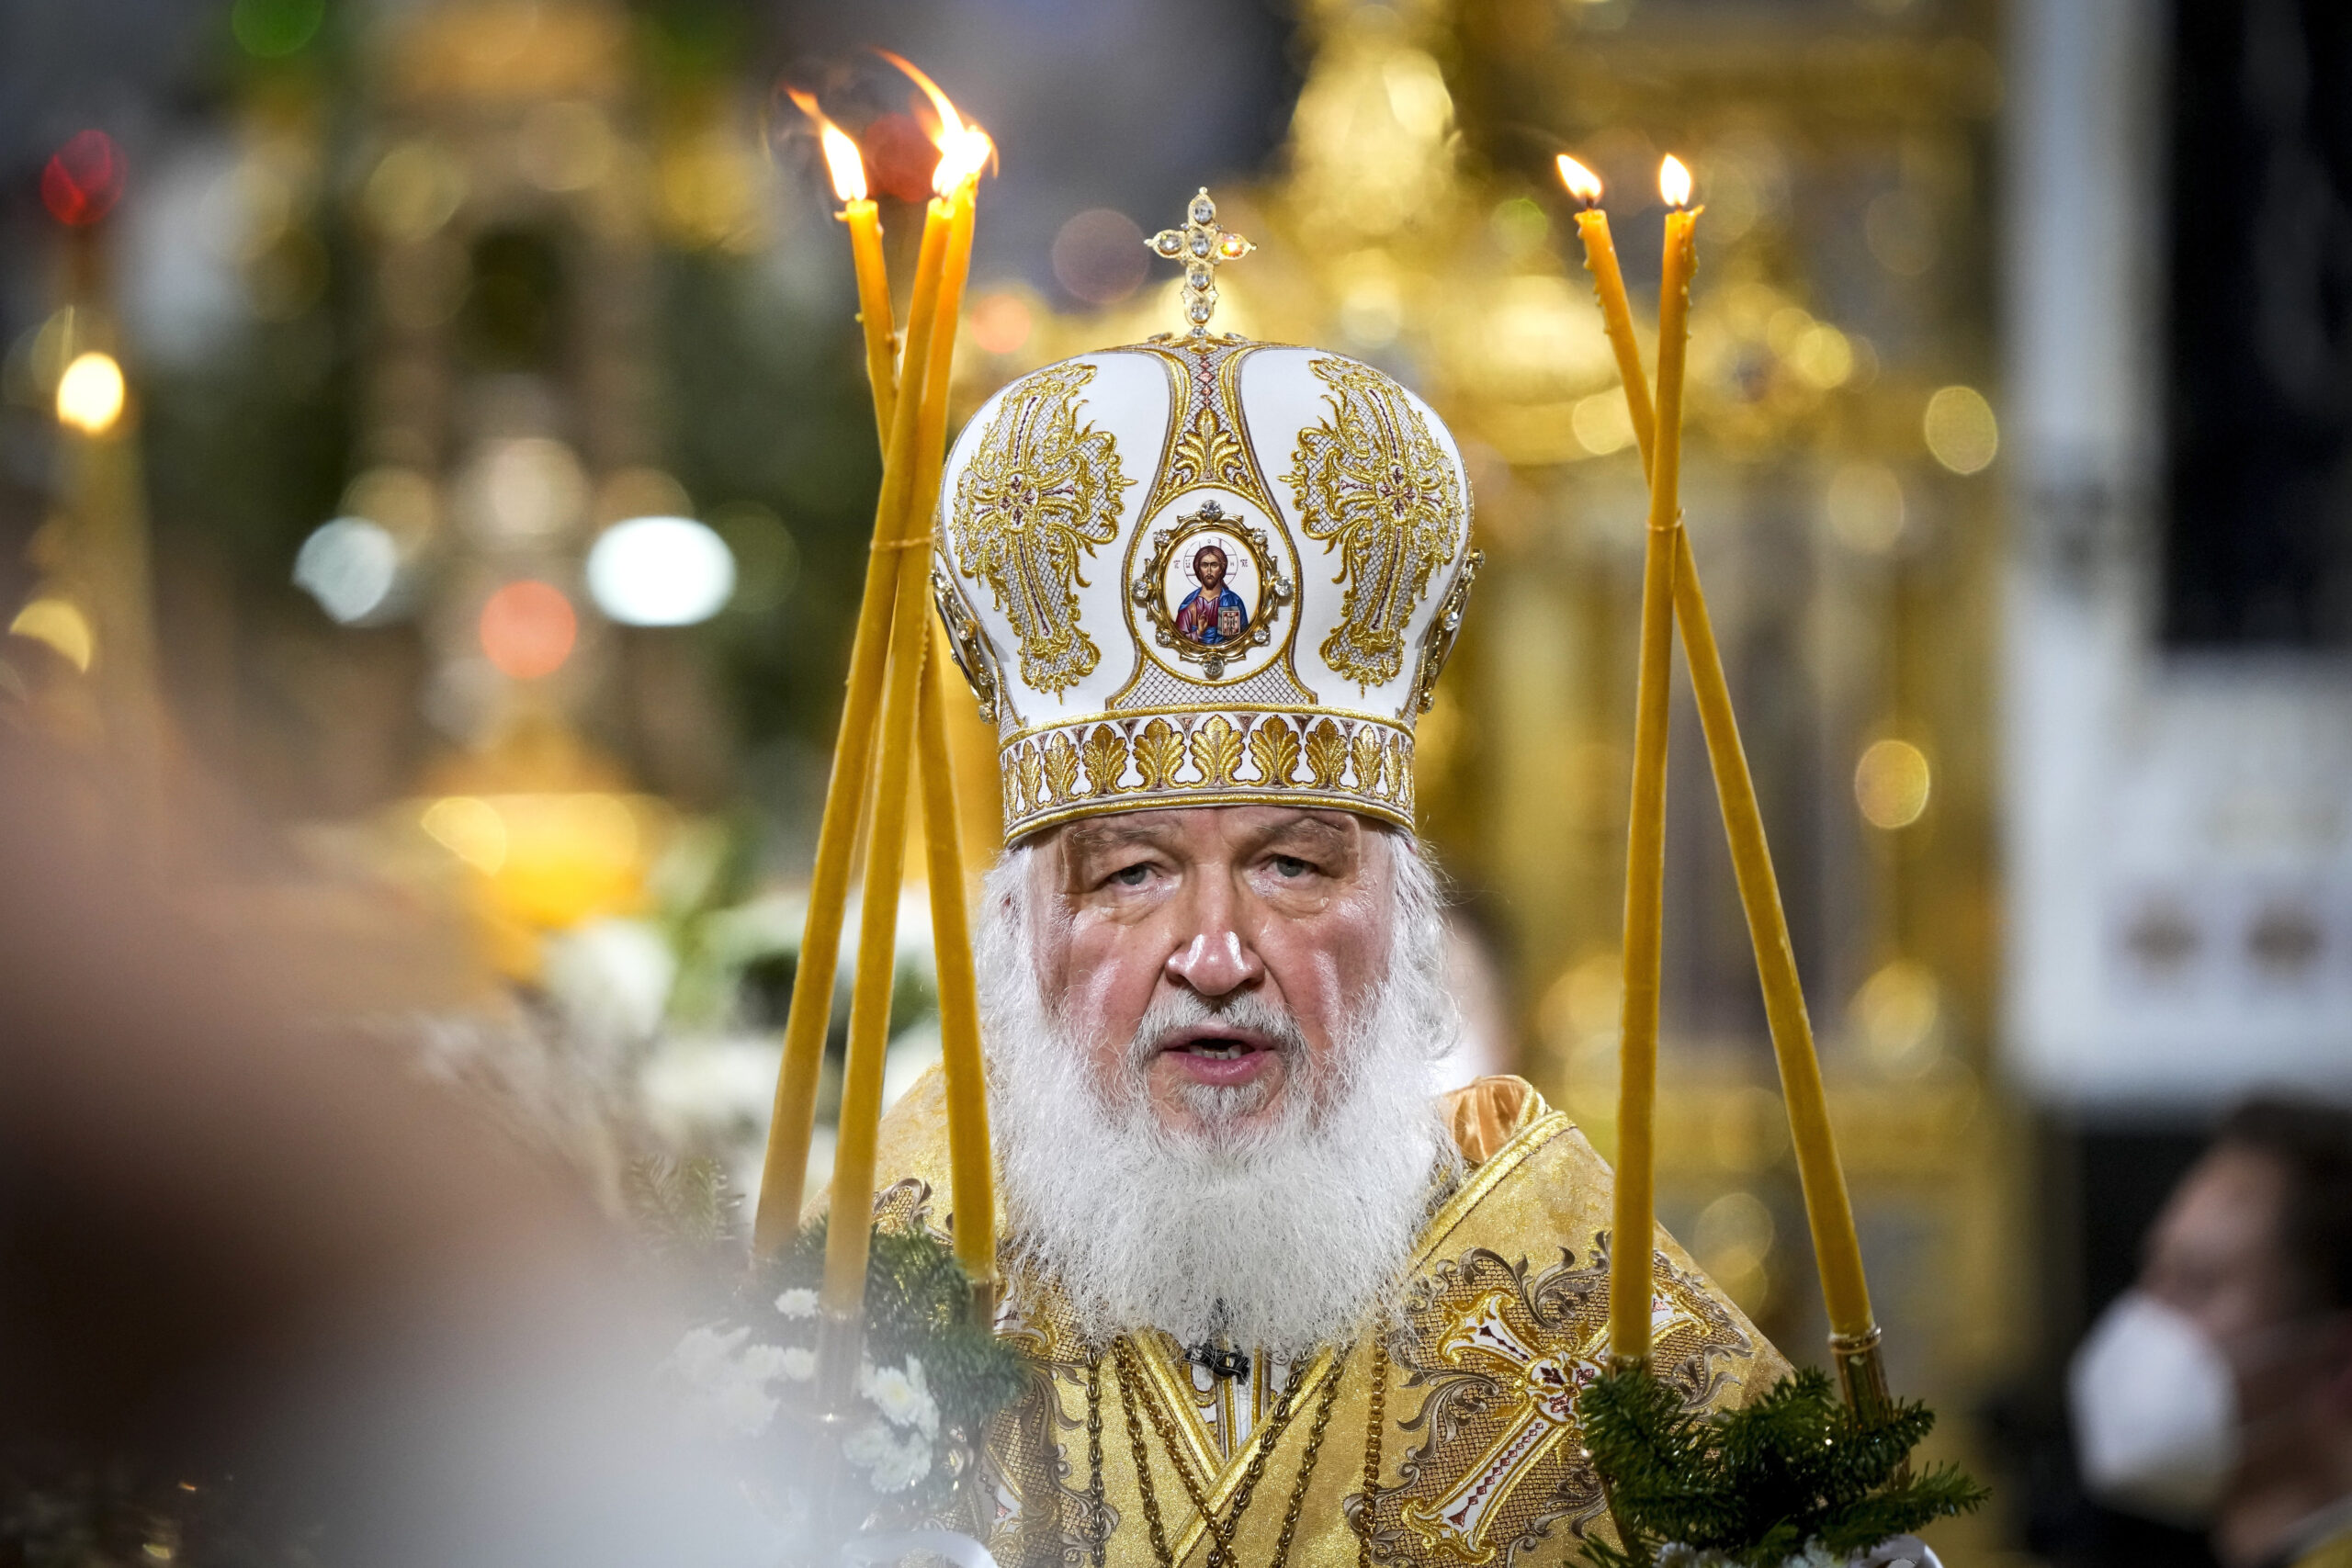 Russian Orthodox Patriarch Kirill in the Christ the Saviour Cathedral in Moscow, Jan. 6, 2022. (AP Photo/Alexander Zemlianichenko)